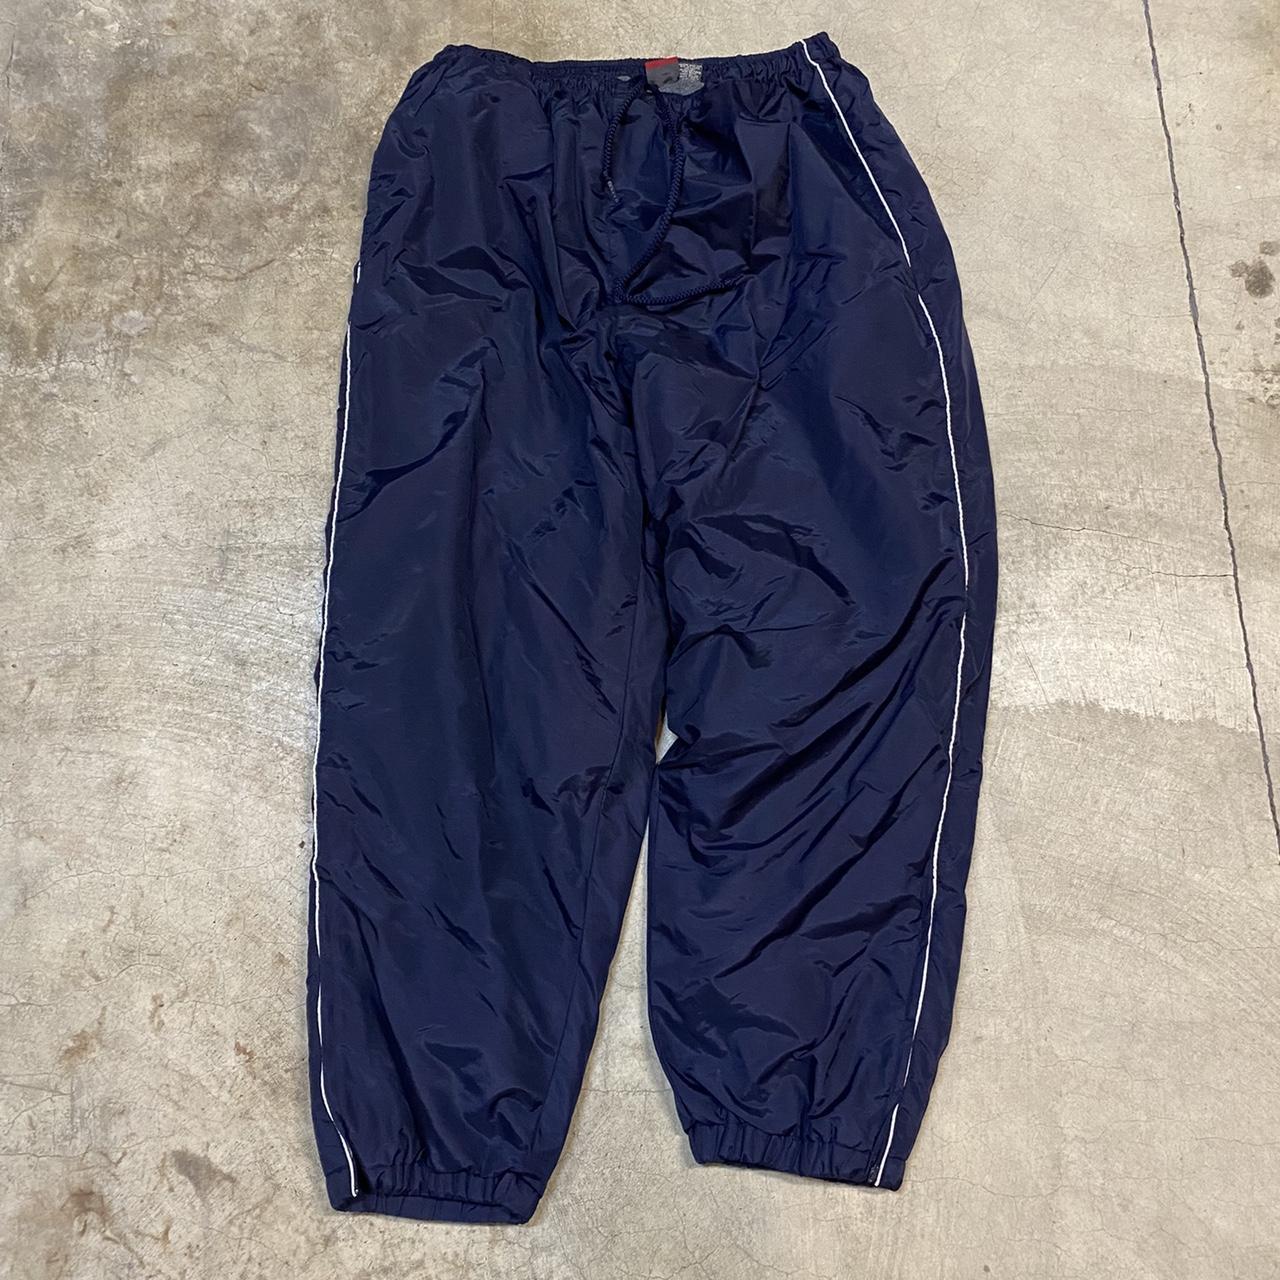 Insulated track pants Super sick reflective on the... - Depop